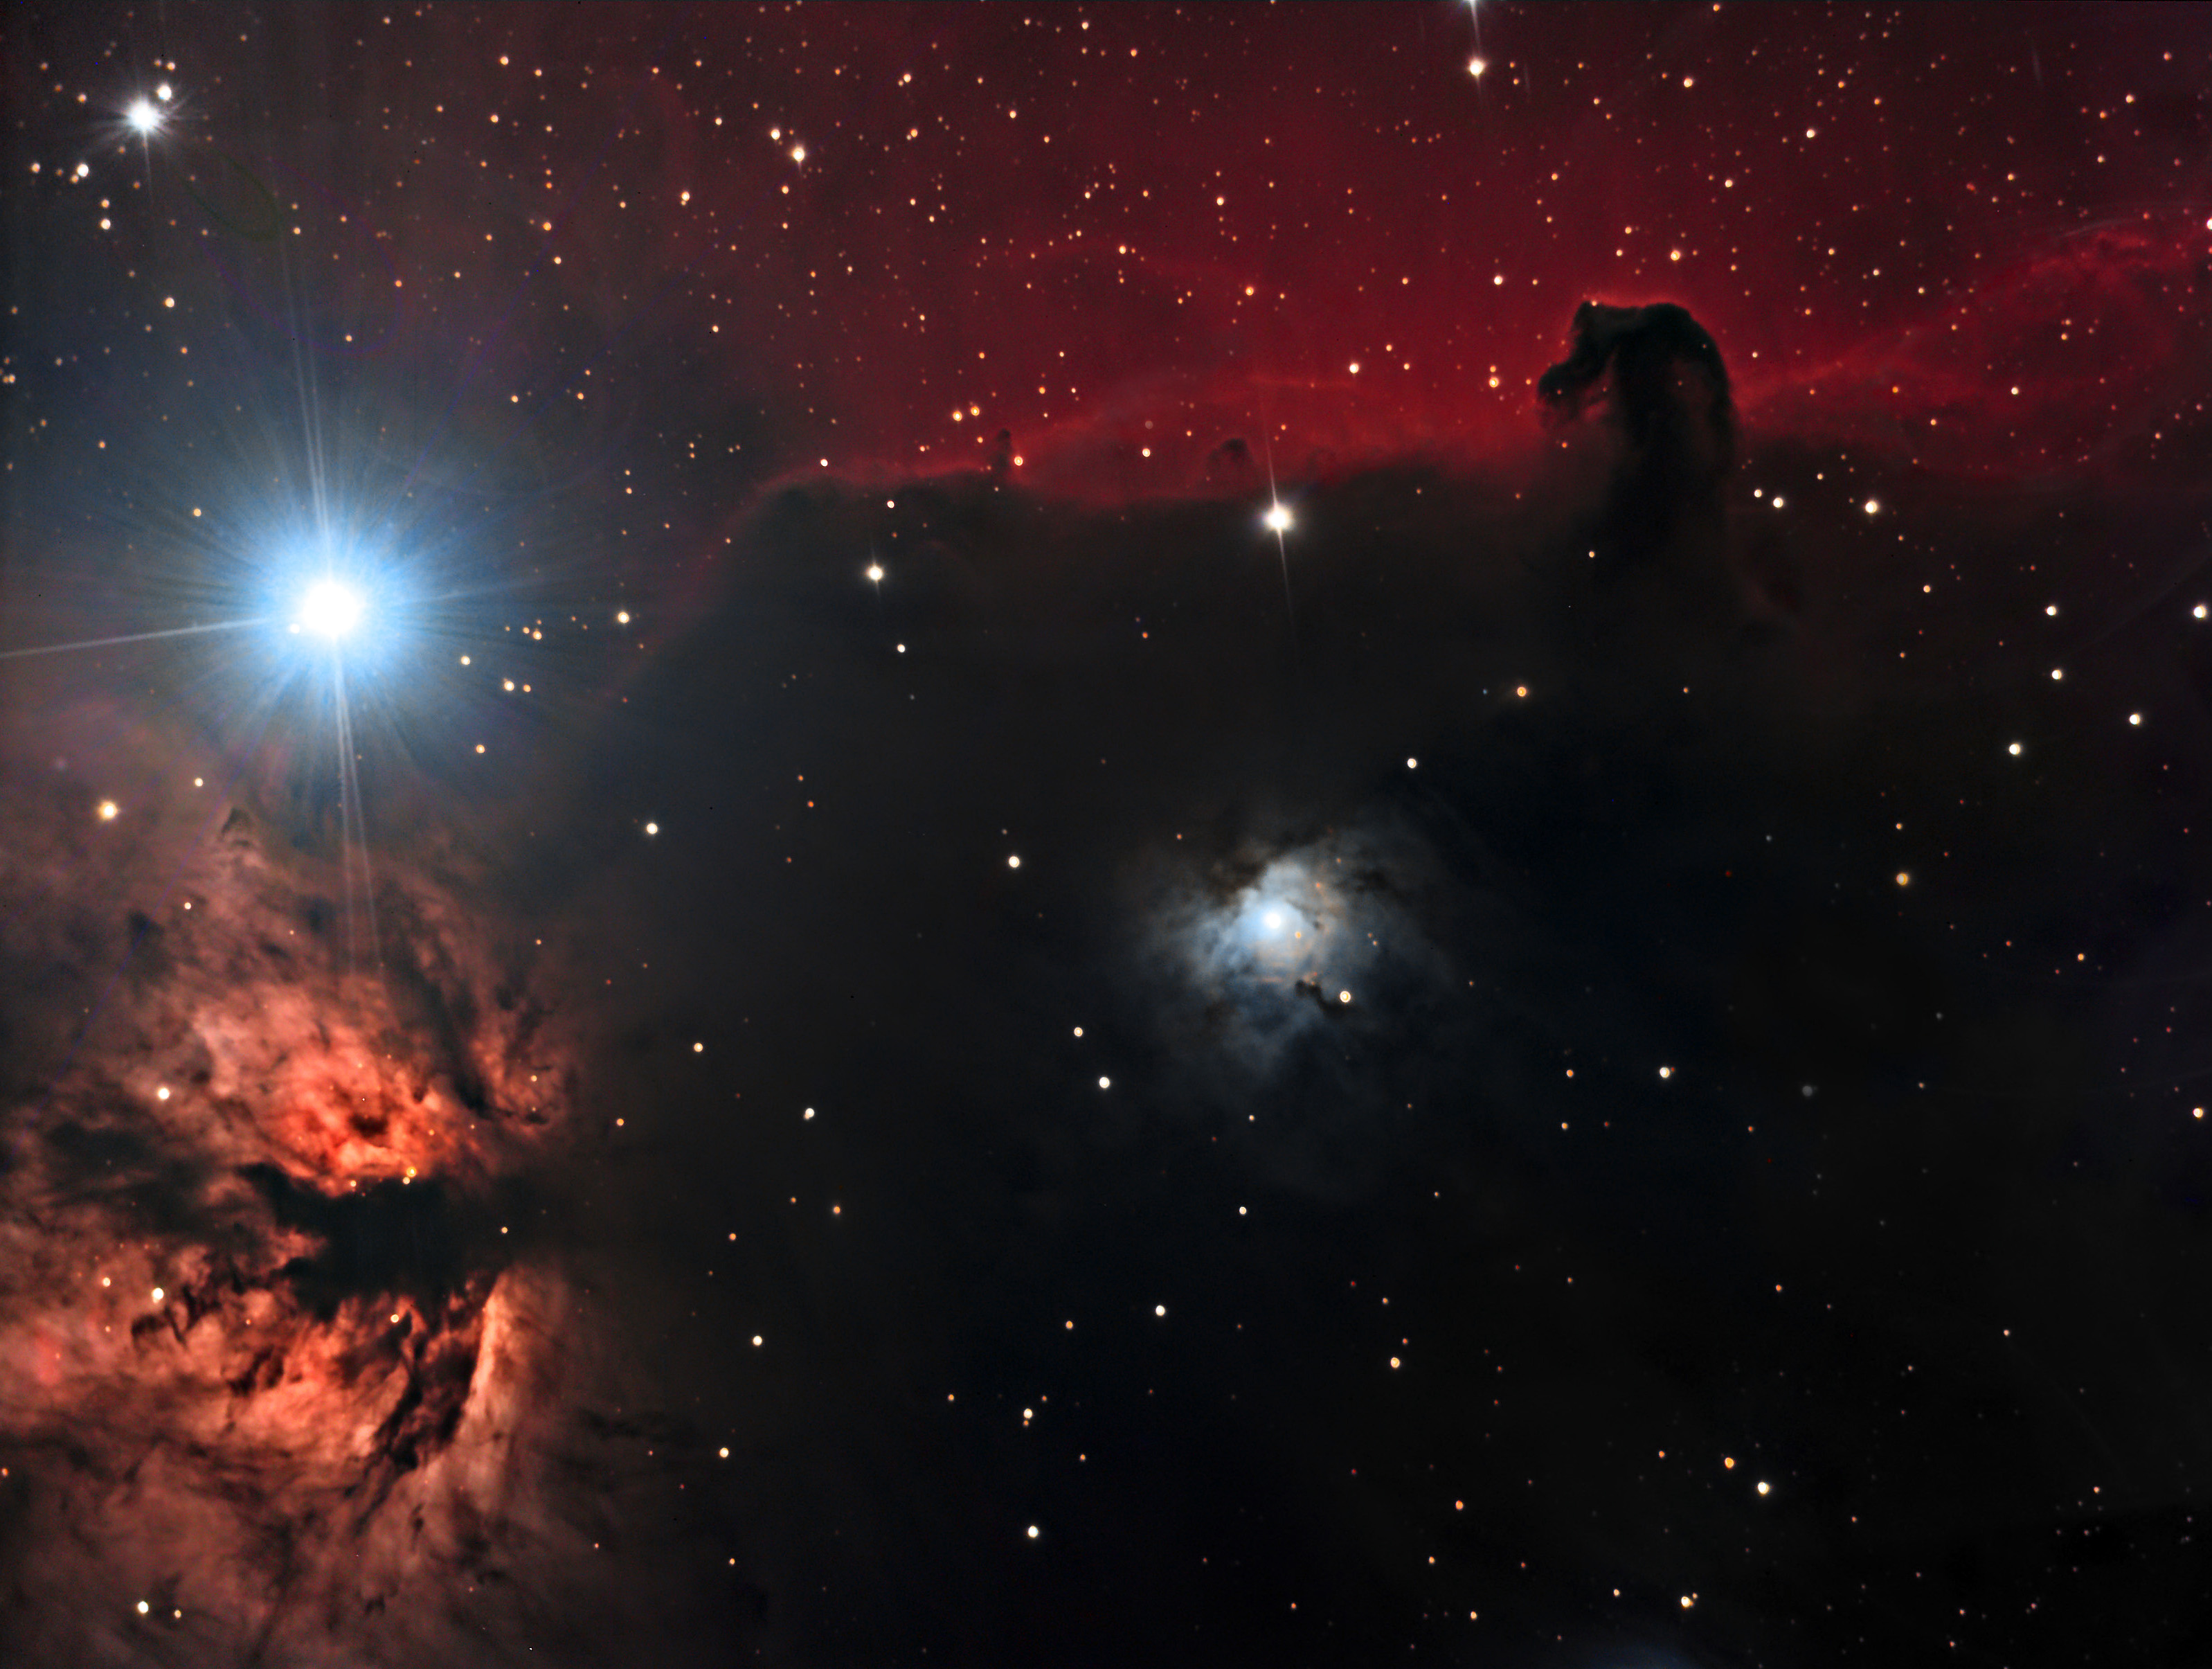 Image of the Month: The Horsehead Nebula